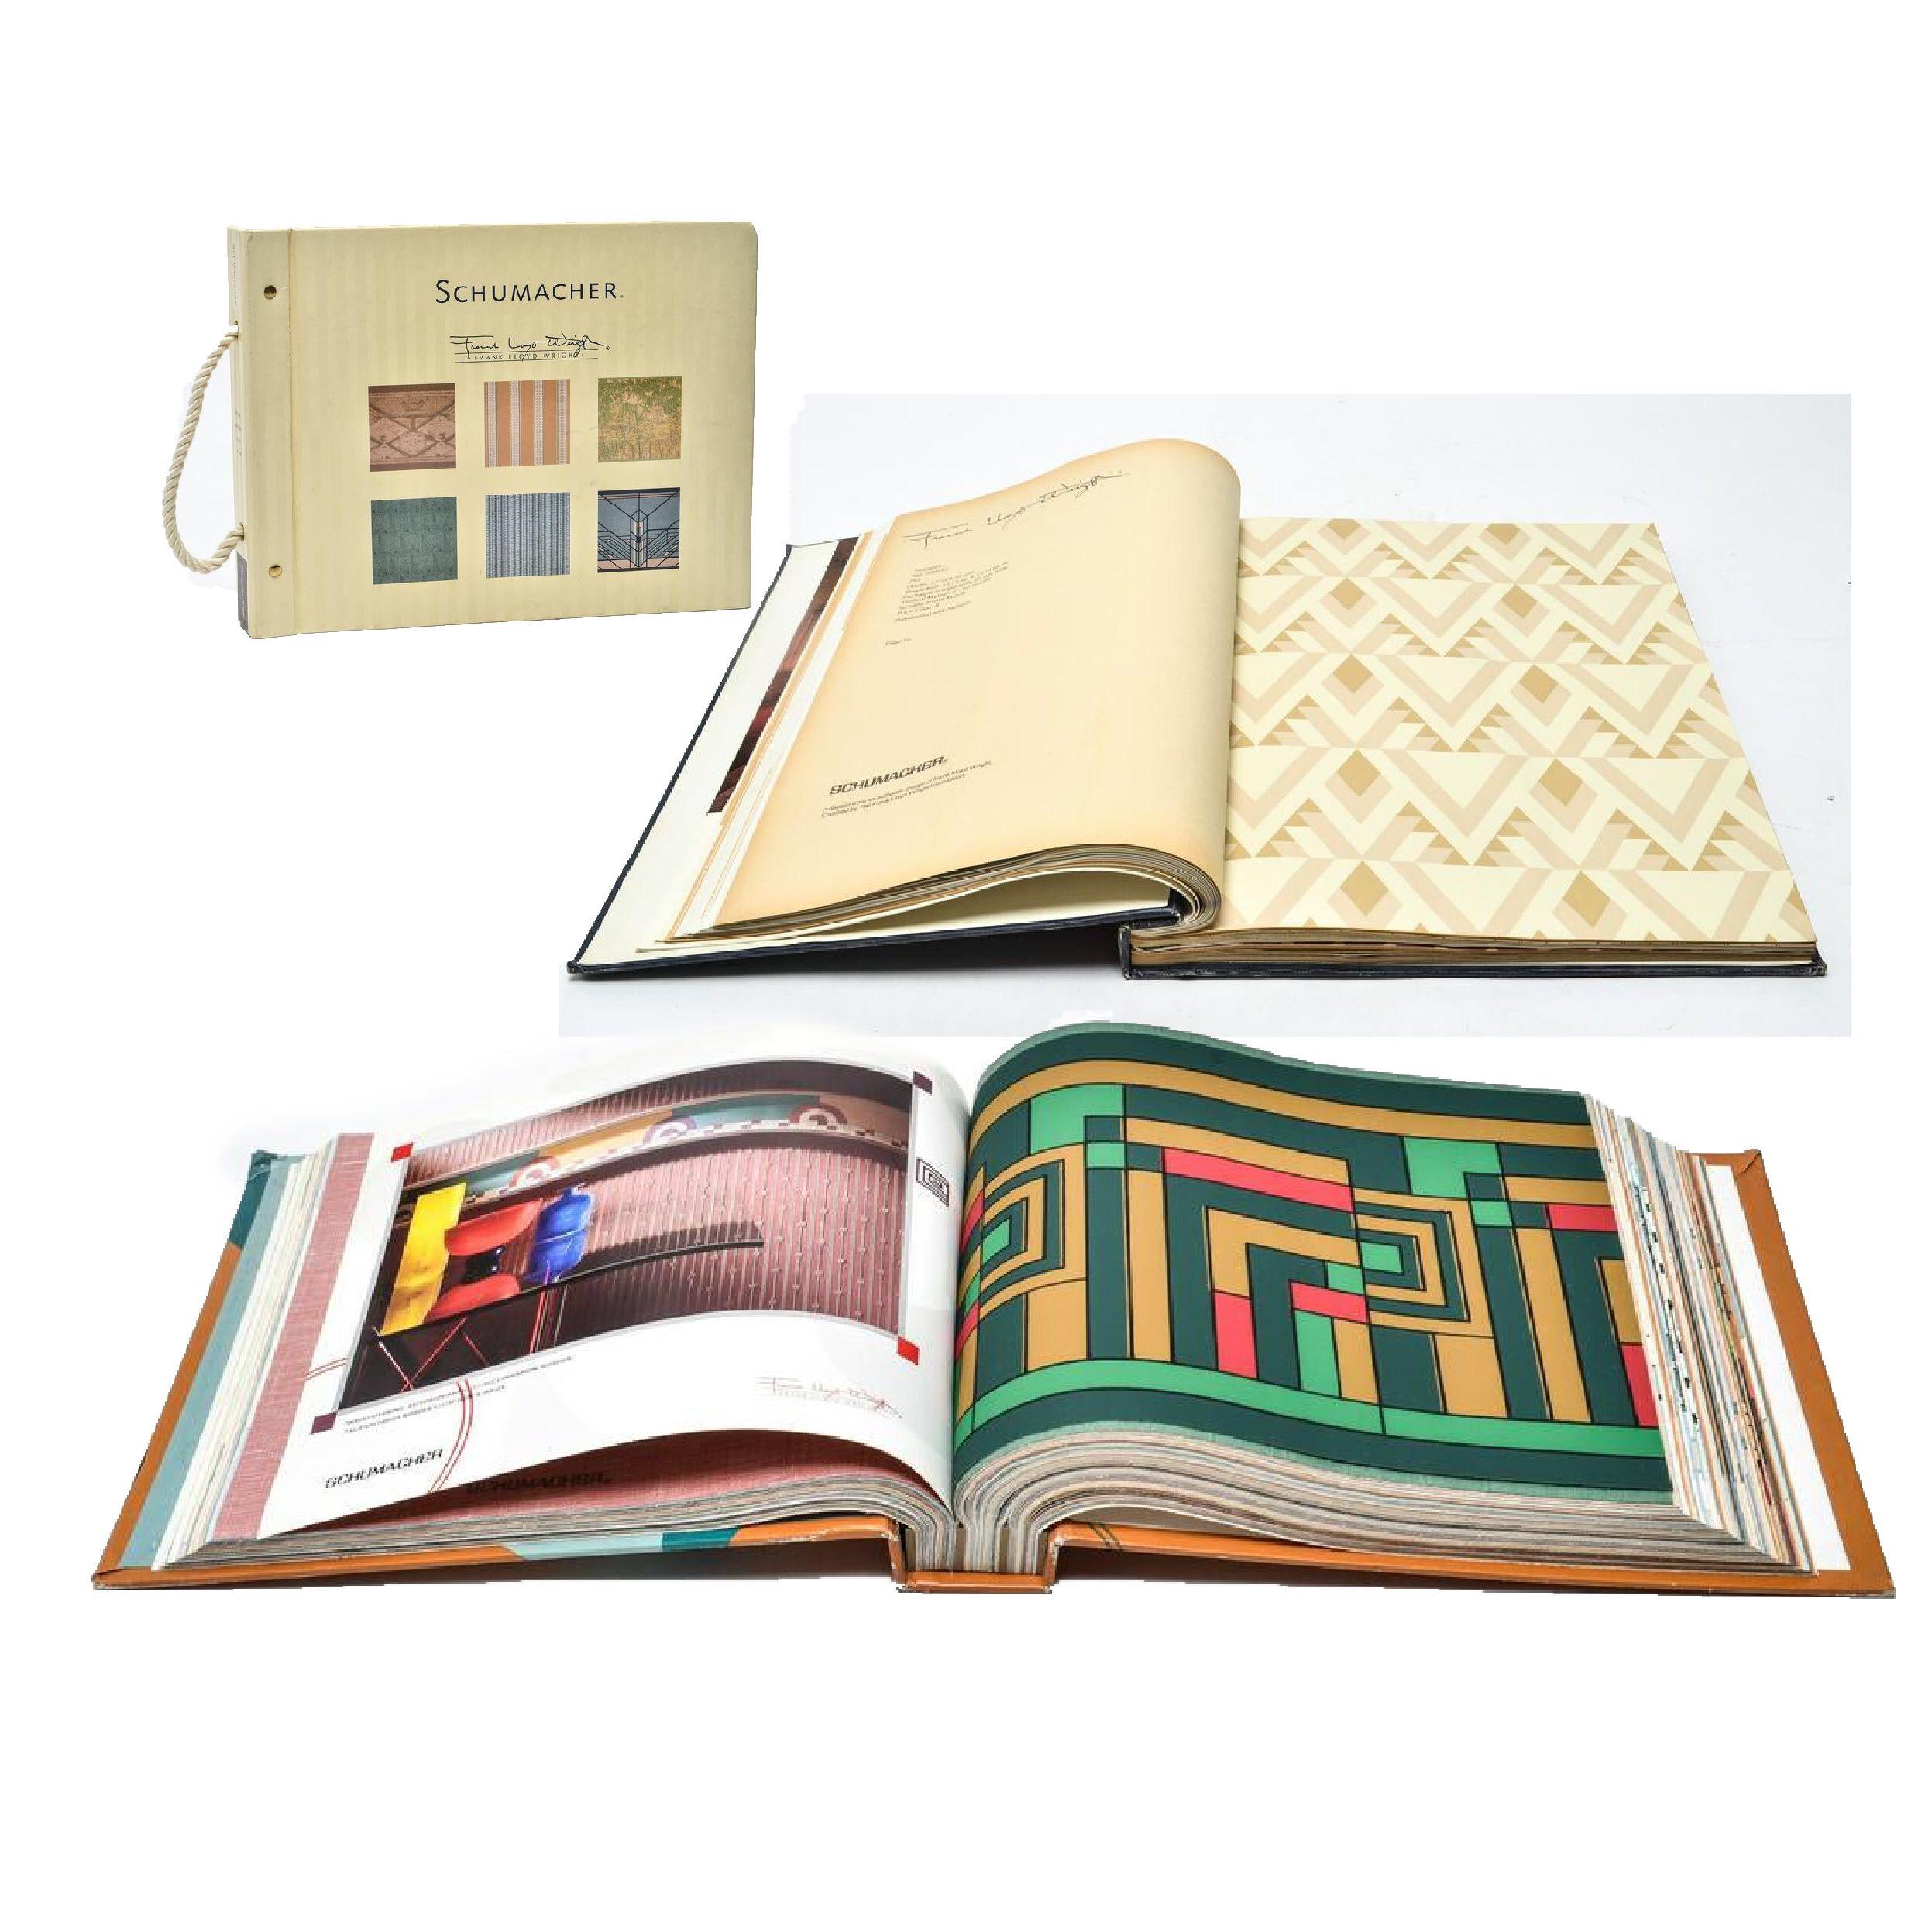 20th Century Frank Lloyd Wright Schumacher Wallcovering Fabric Book Catalogue Reference, 1986